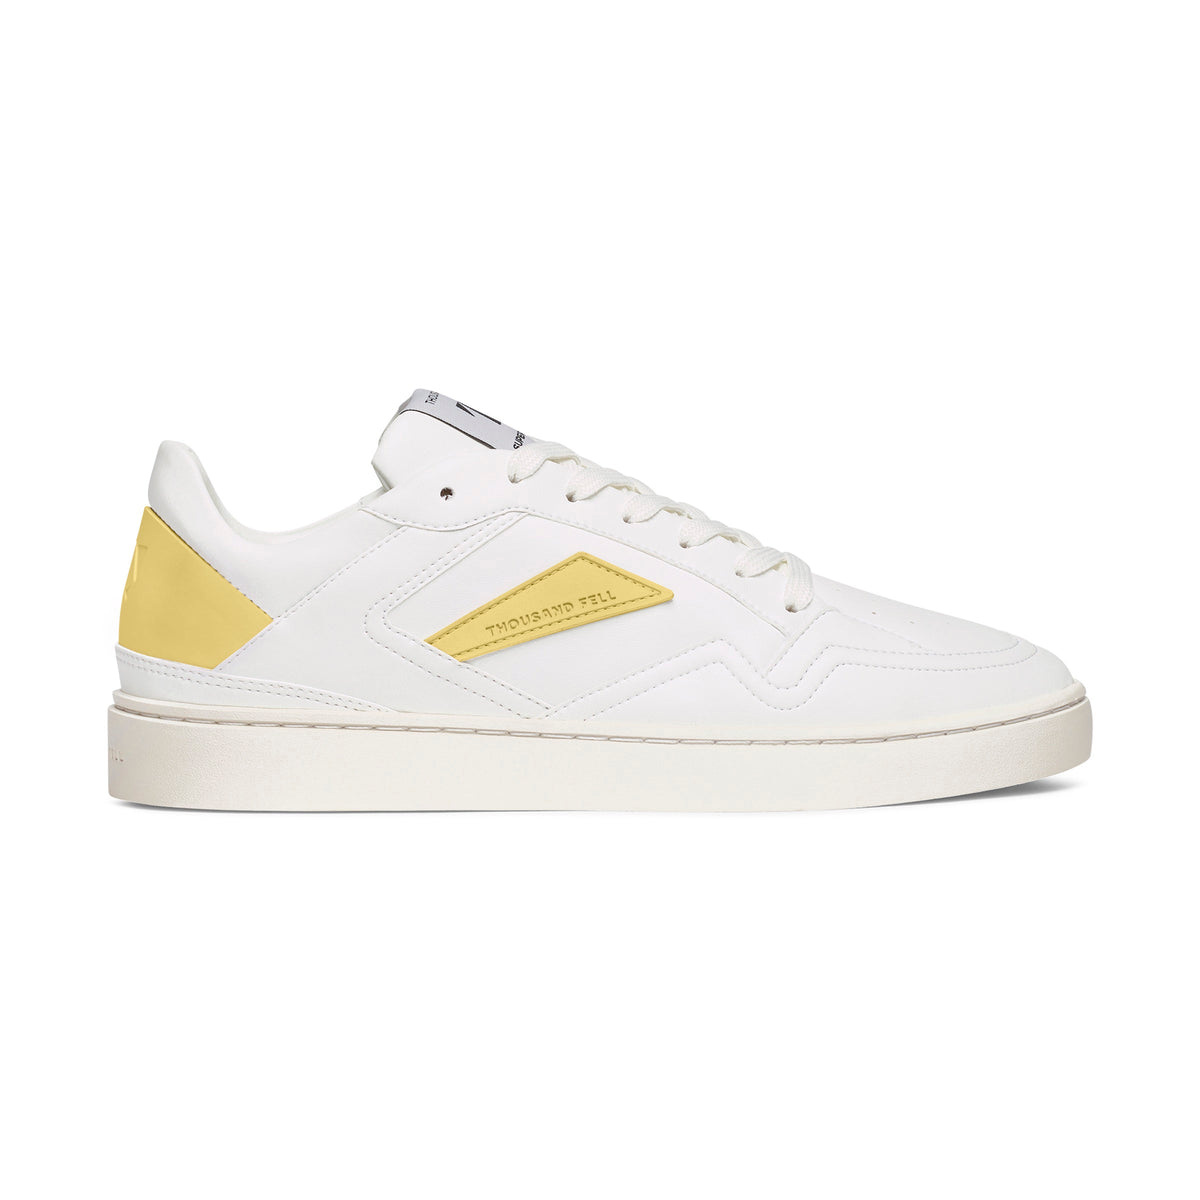 sustainable sneaker featuring white breathable recycled upper with yellow details